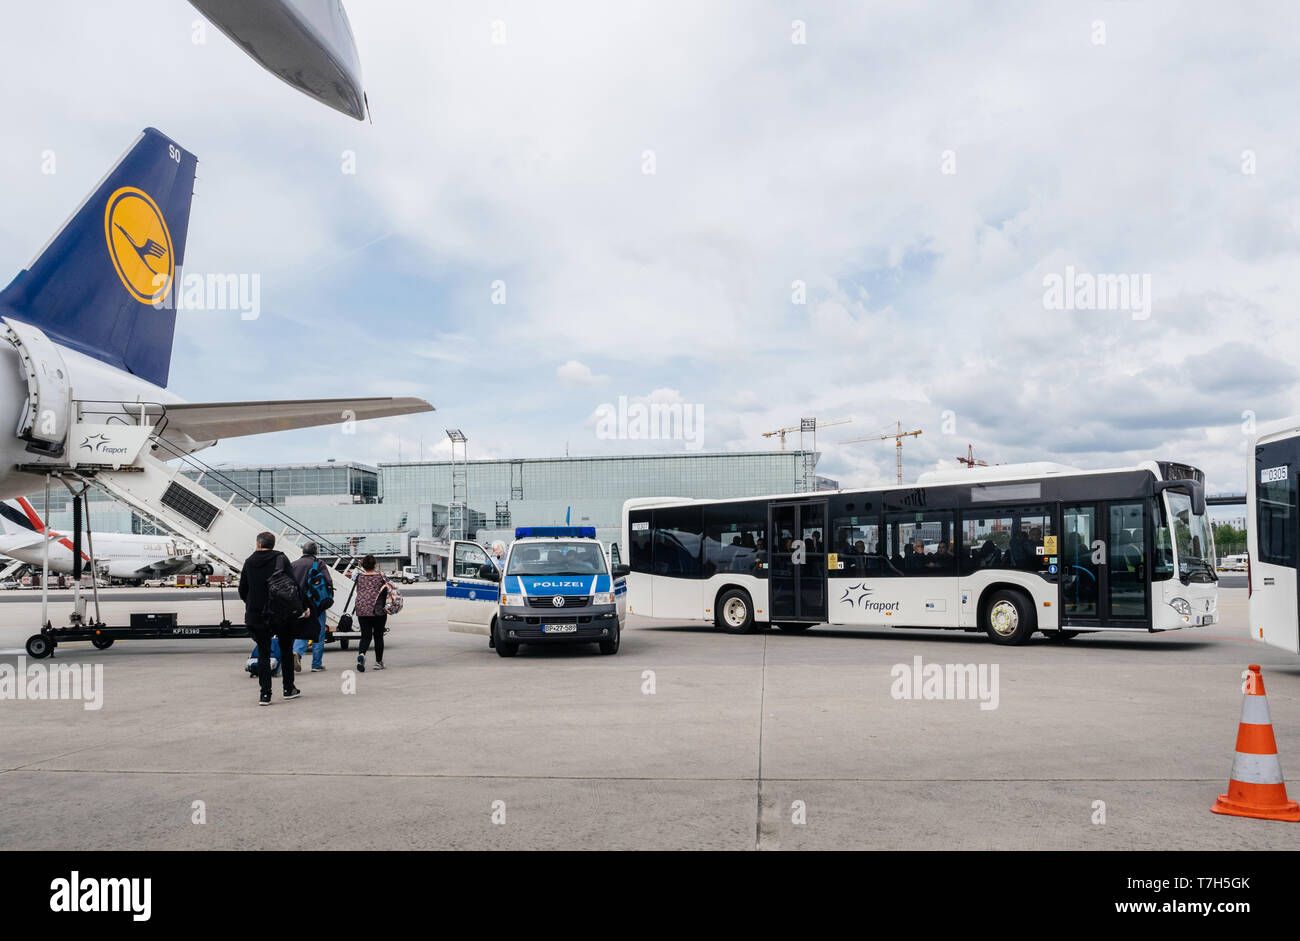 Frankfurt, Germany - Apr 29, 2019: Airbus A321-231 D-AISO on tarmac with Polizei police van and Fraport bus with passengers preparing for departure wide image Stock Photo